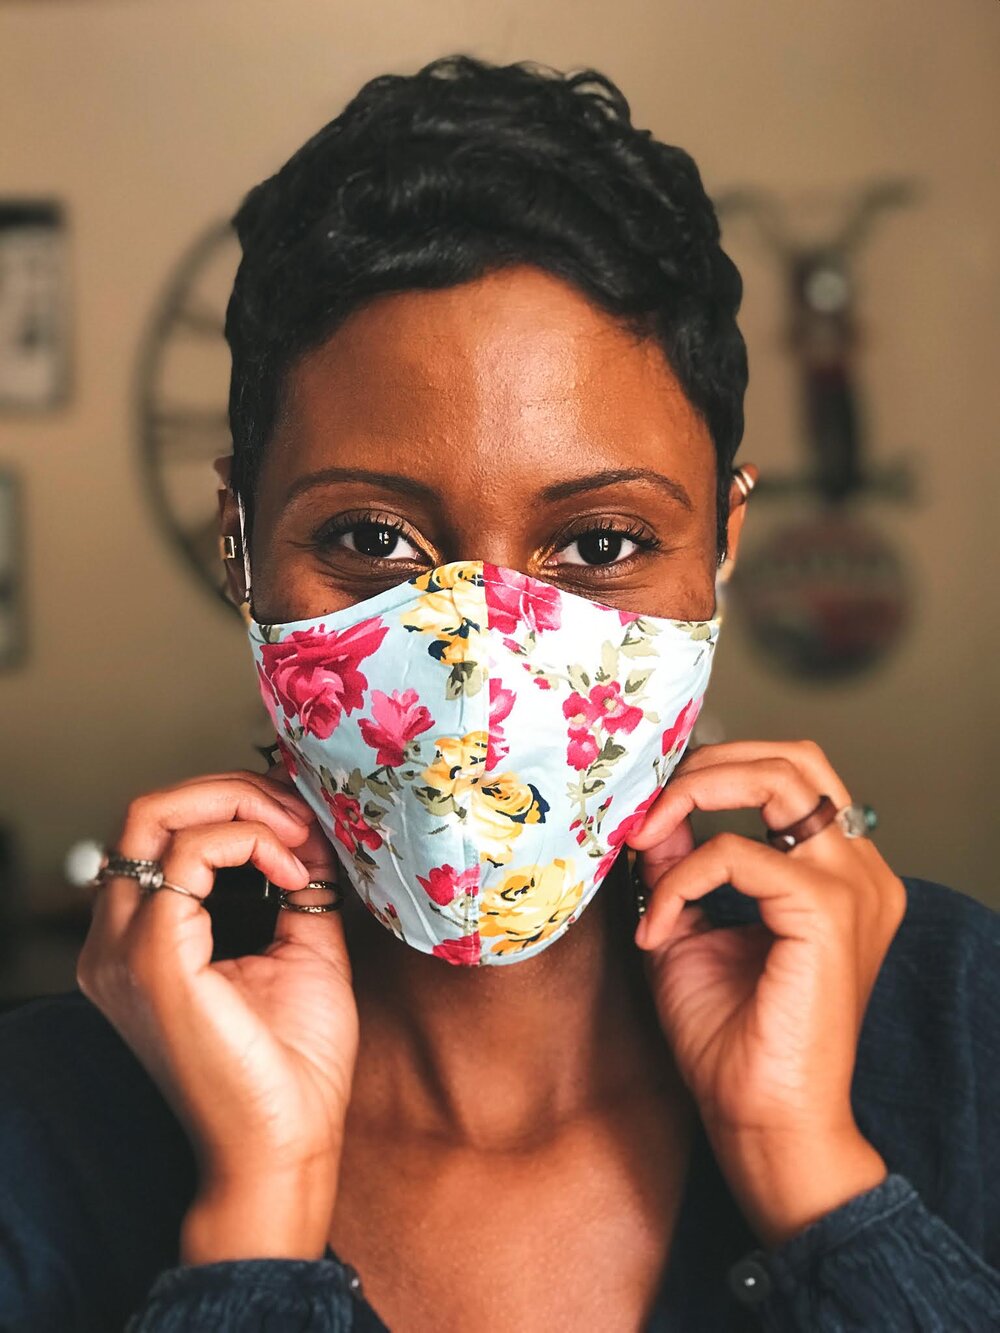 Reversible Floral Face Masks That Make You Feel Stylish And Fierce